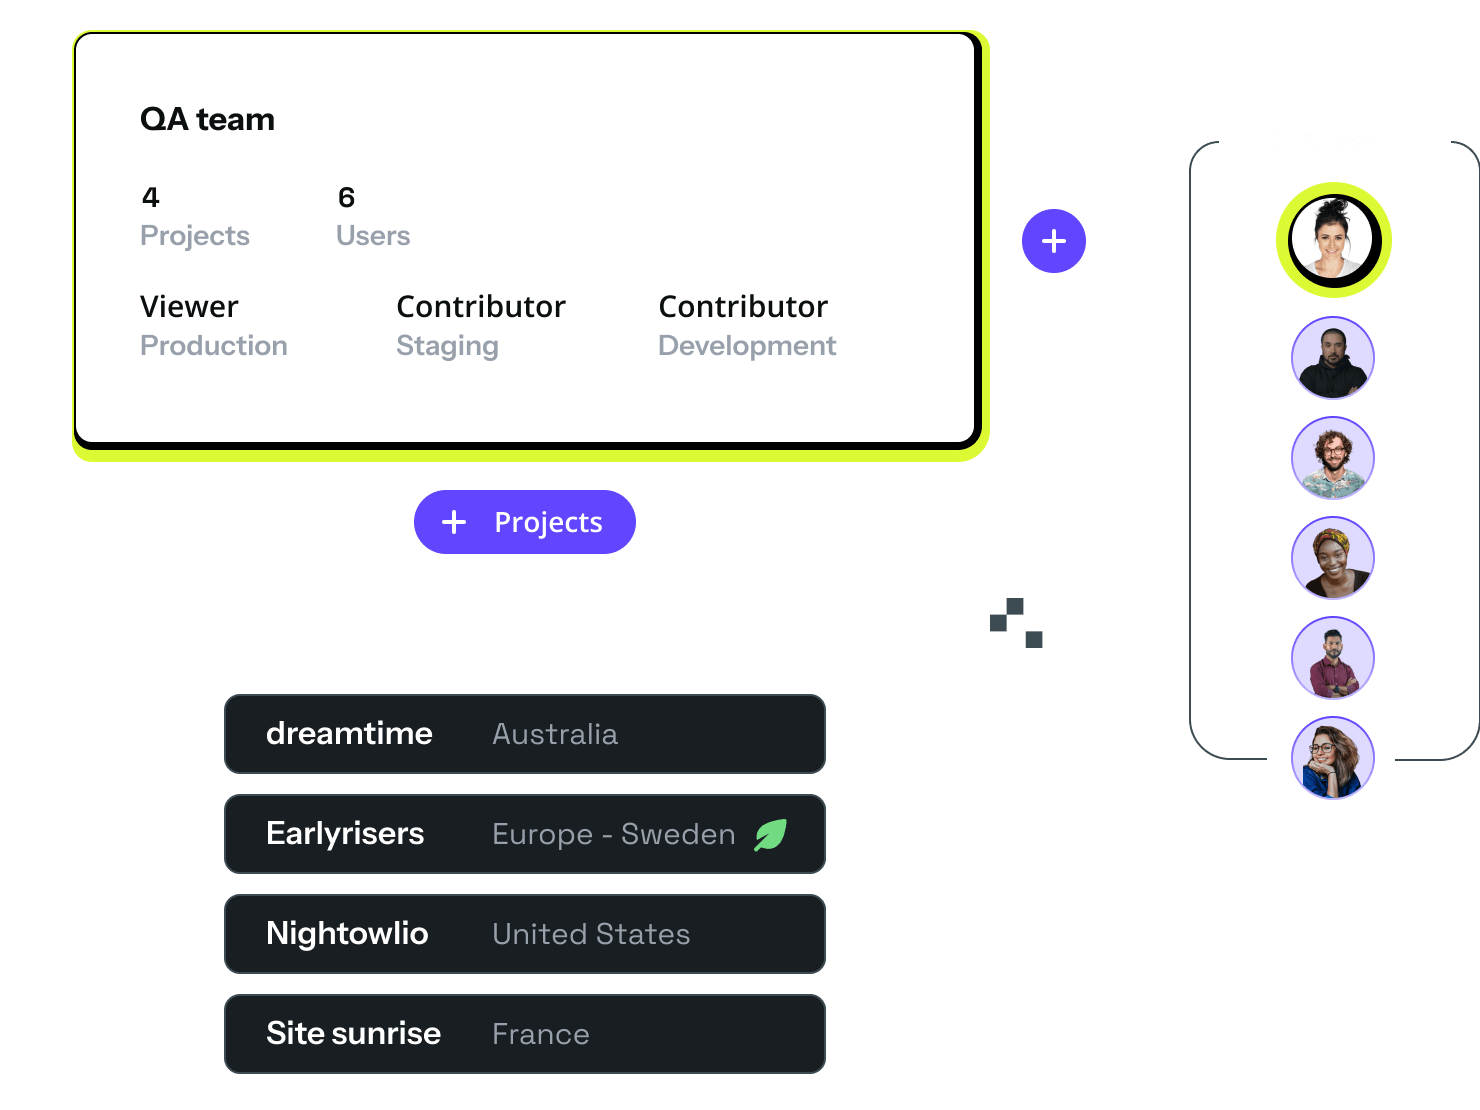 Various versions of UI elements are arranged to show a team with 4 projects and 6 users. The projects listed are websites and applications in Australia, Europe, United States, and France. The dev team is shown by avatars in a vertical line to the right of the information.